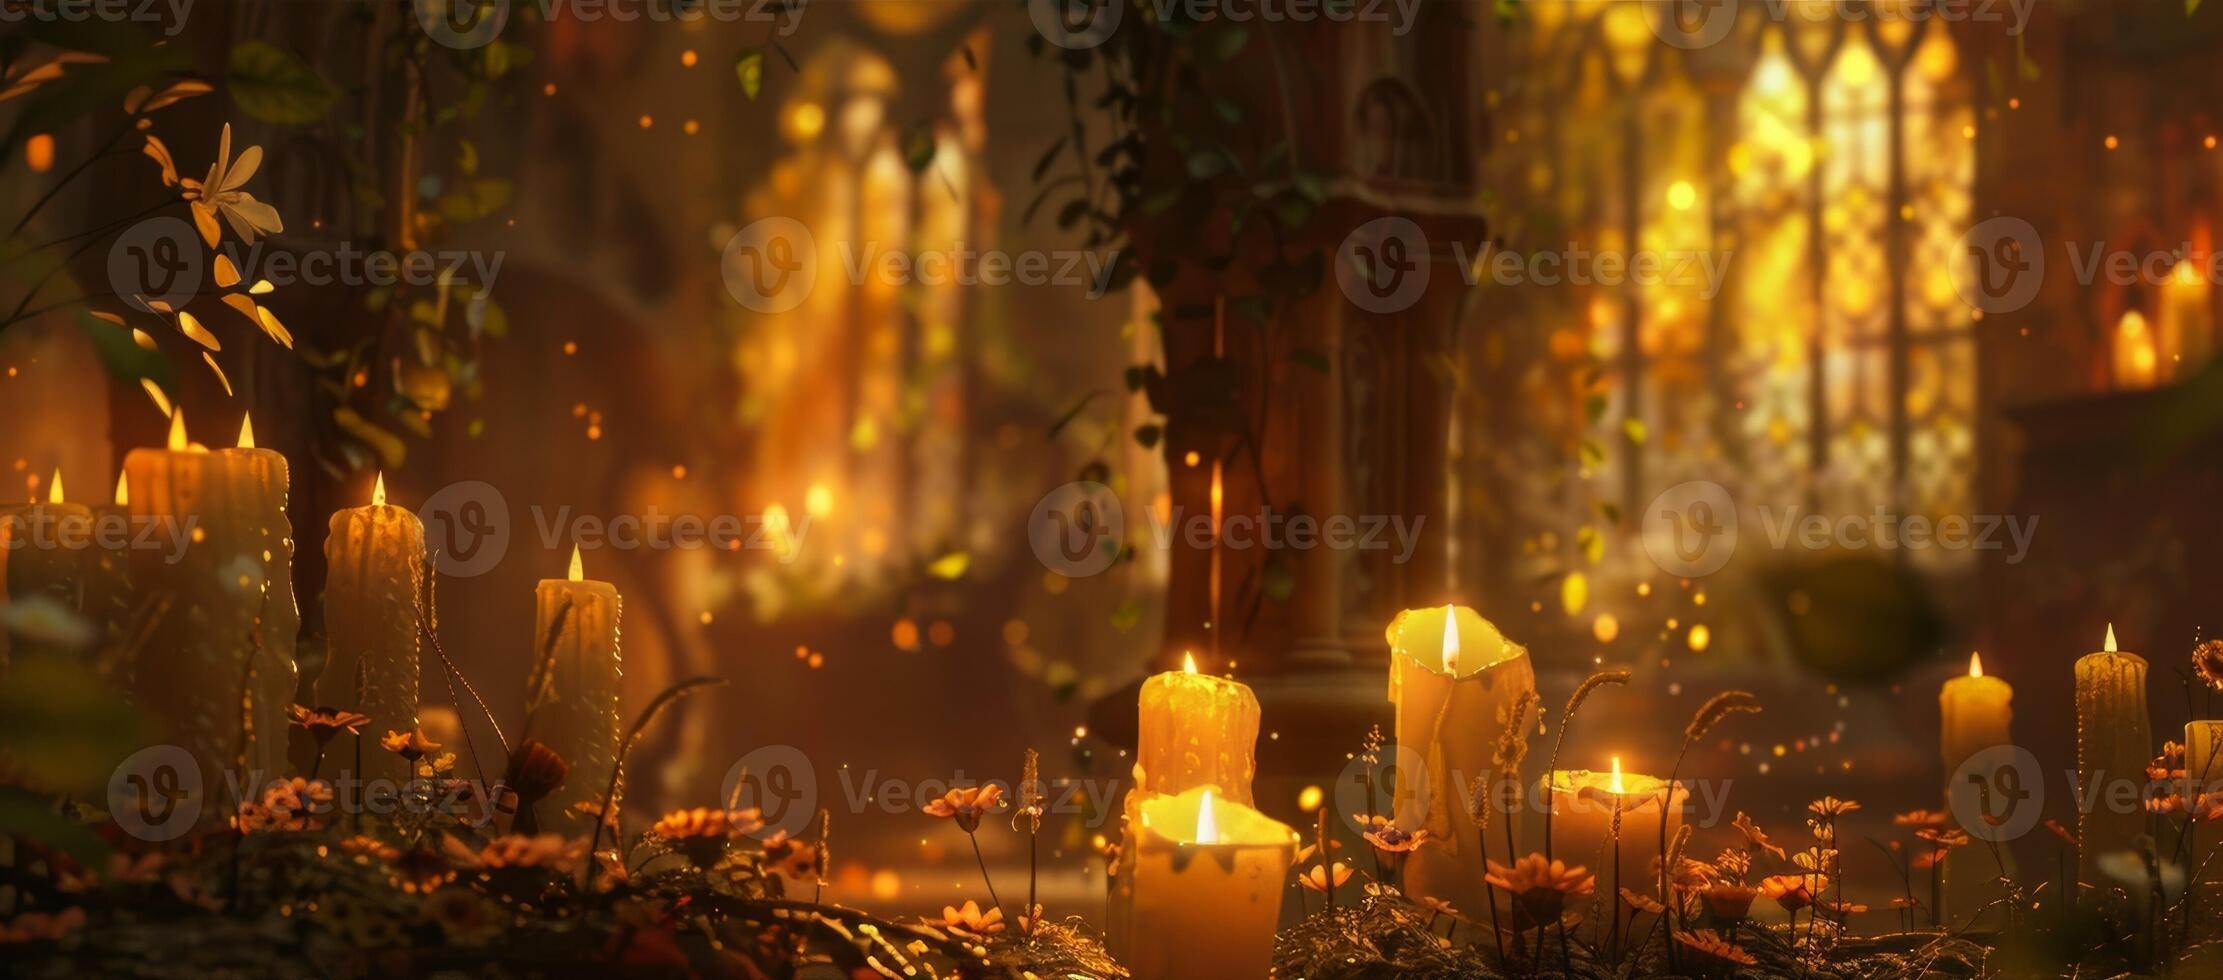 Illuminated by flickering candlelight the storytellers animated gestures bring the narrative to life. 2d flat cartoon photo